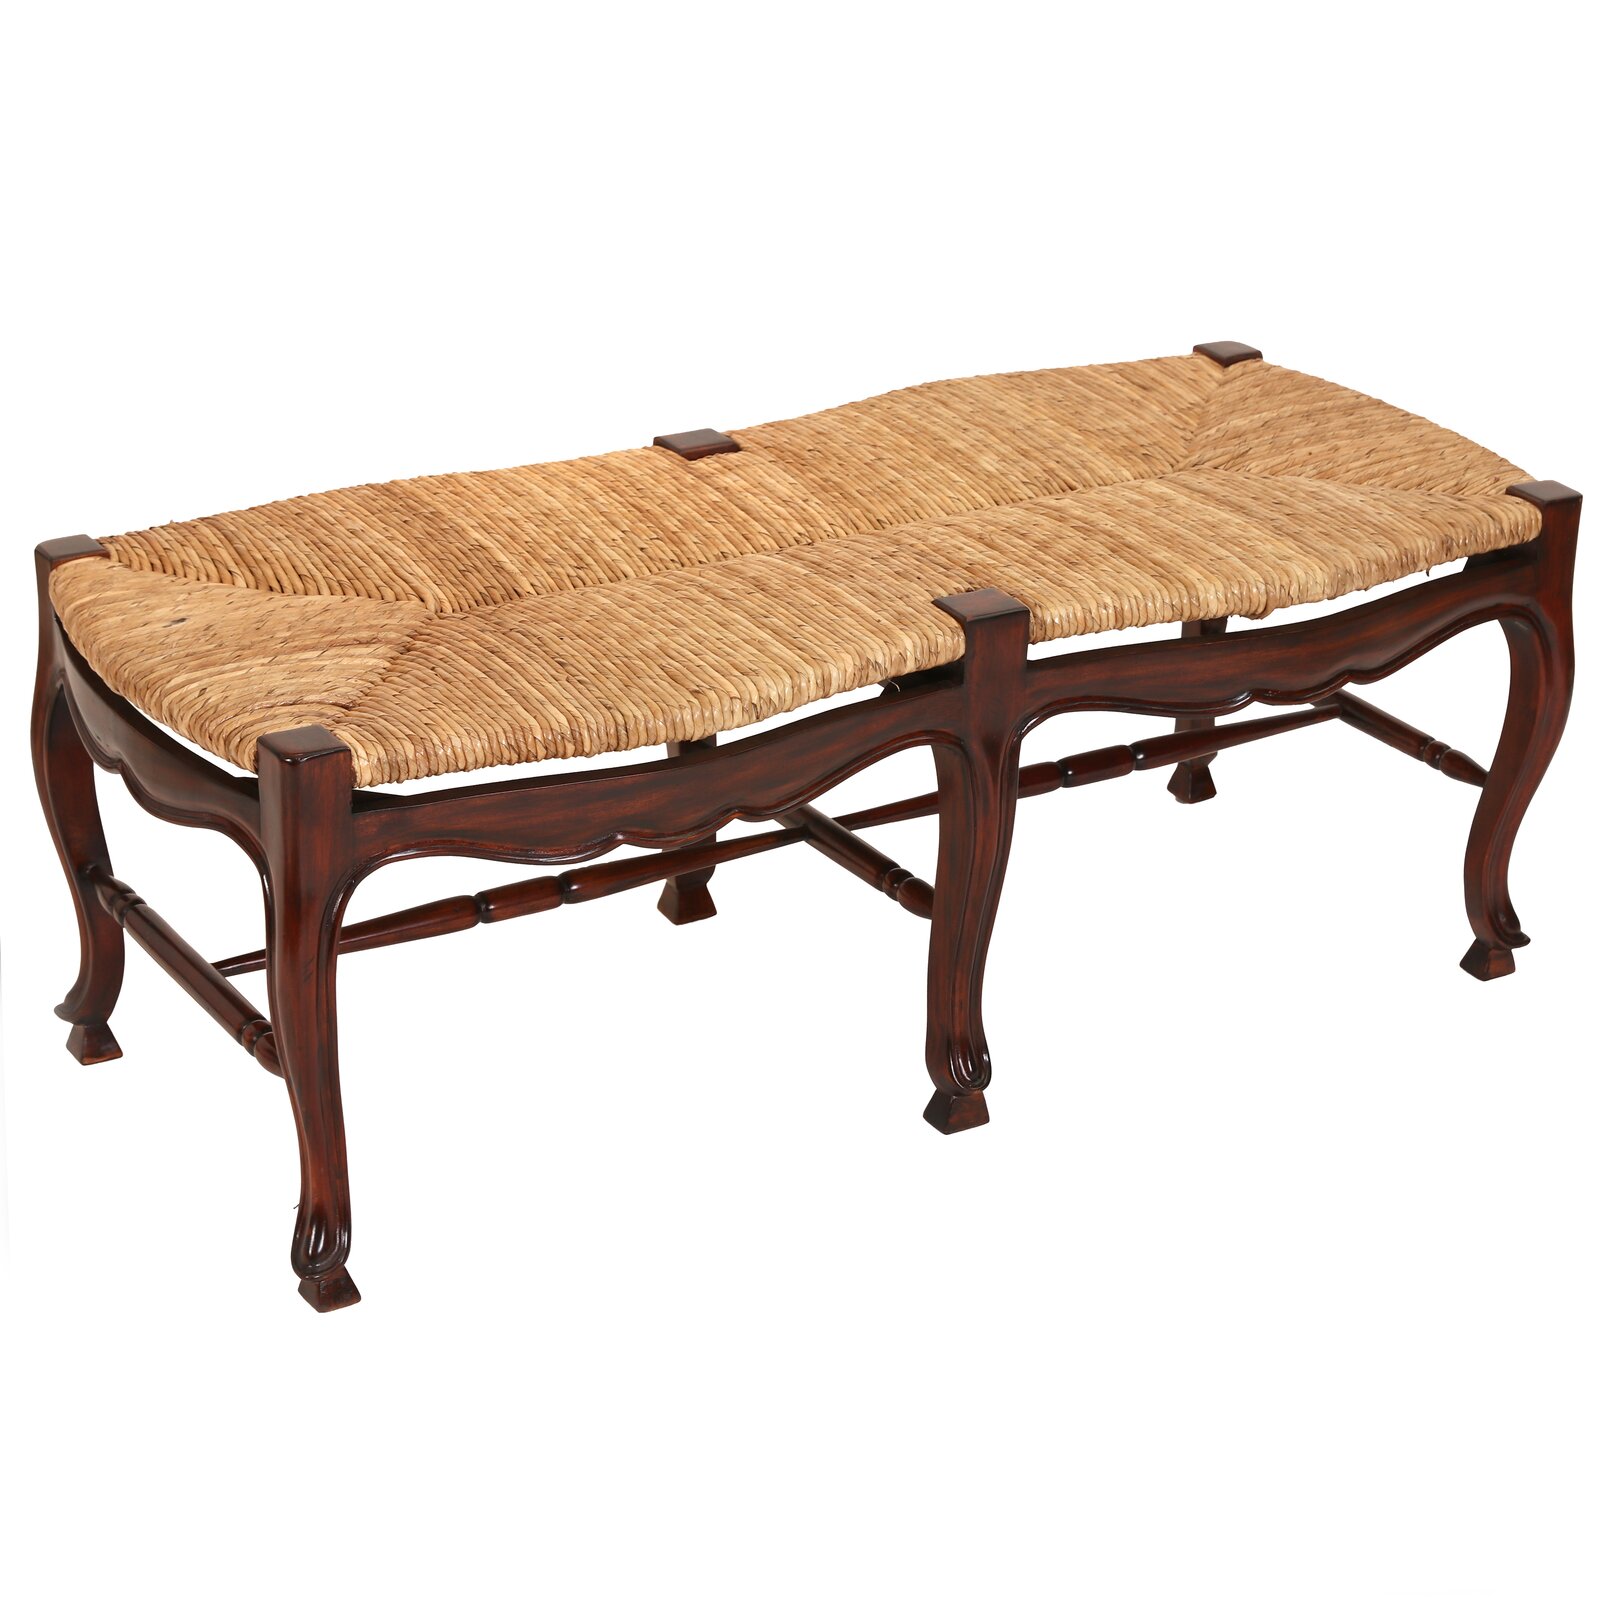 Manor Born Furnishings Toulouse Wood Bench & Reviews